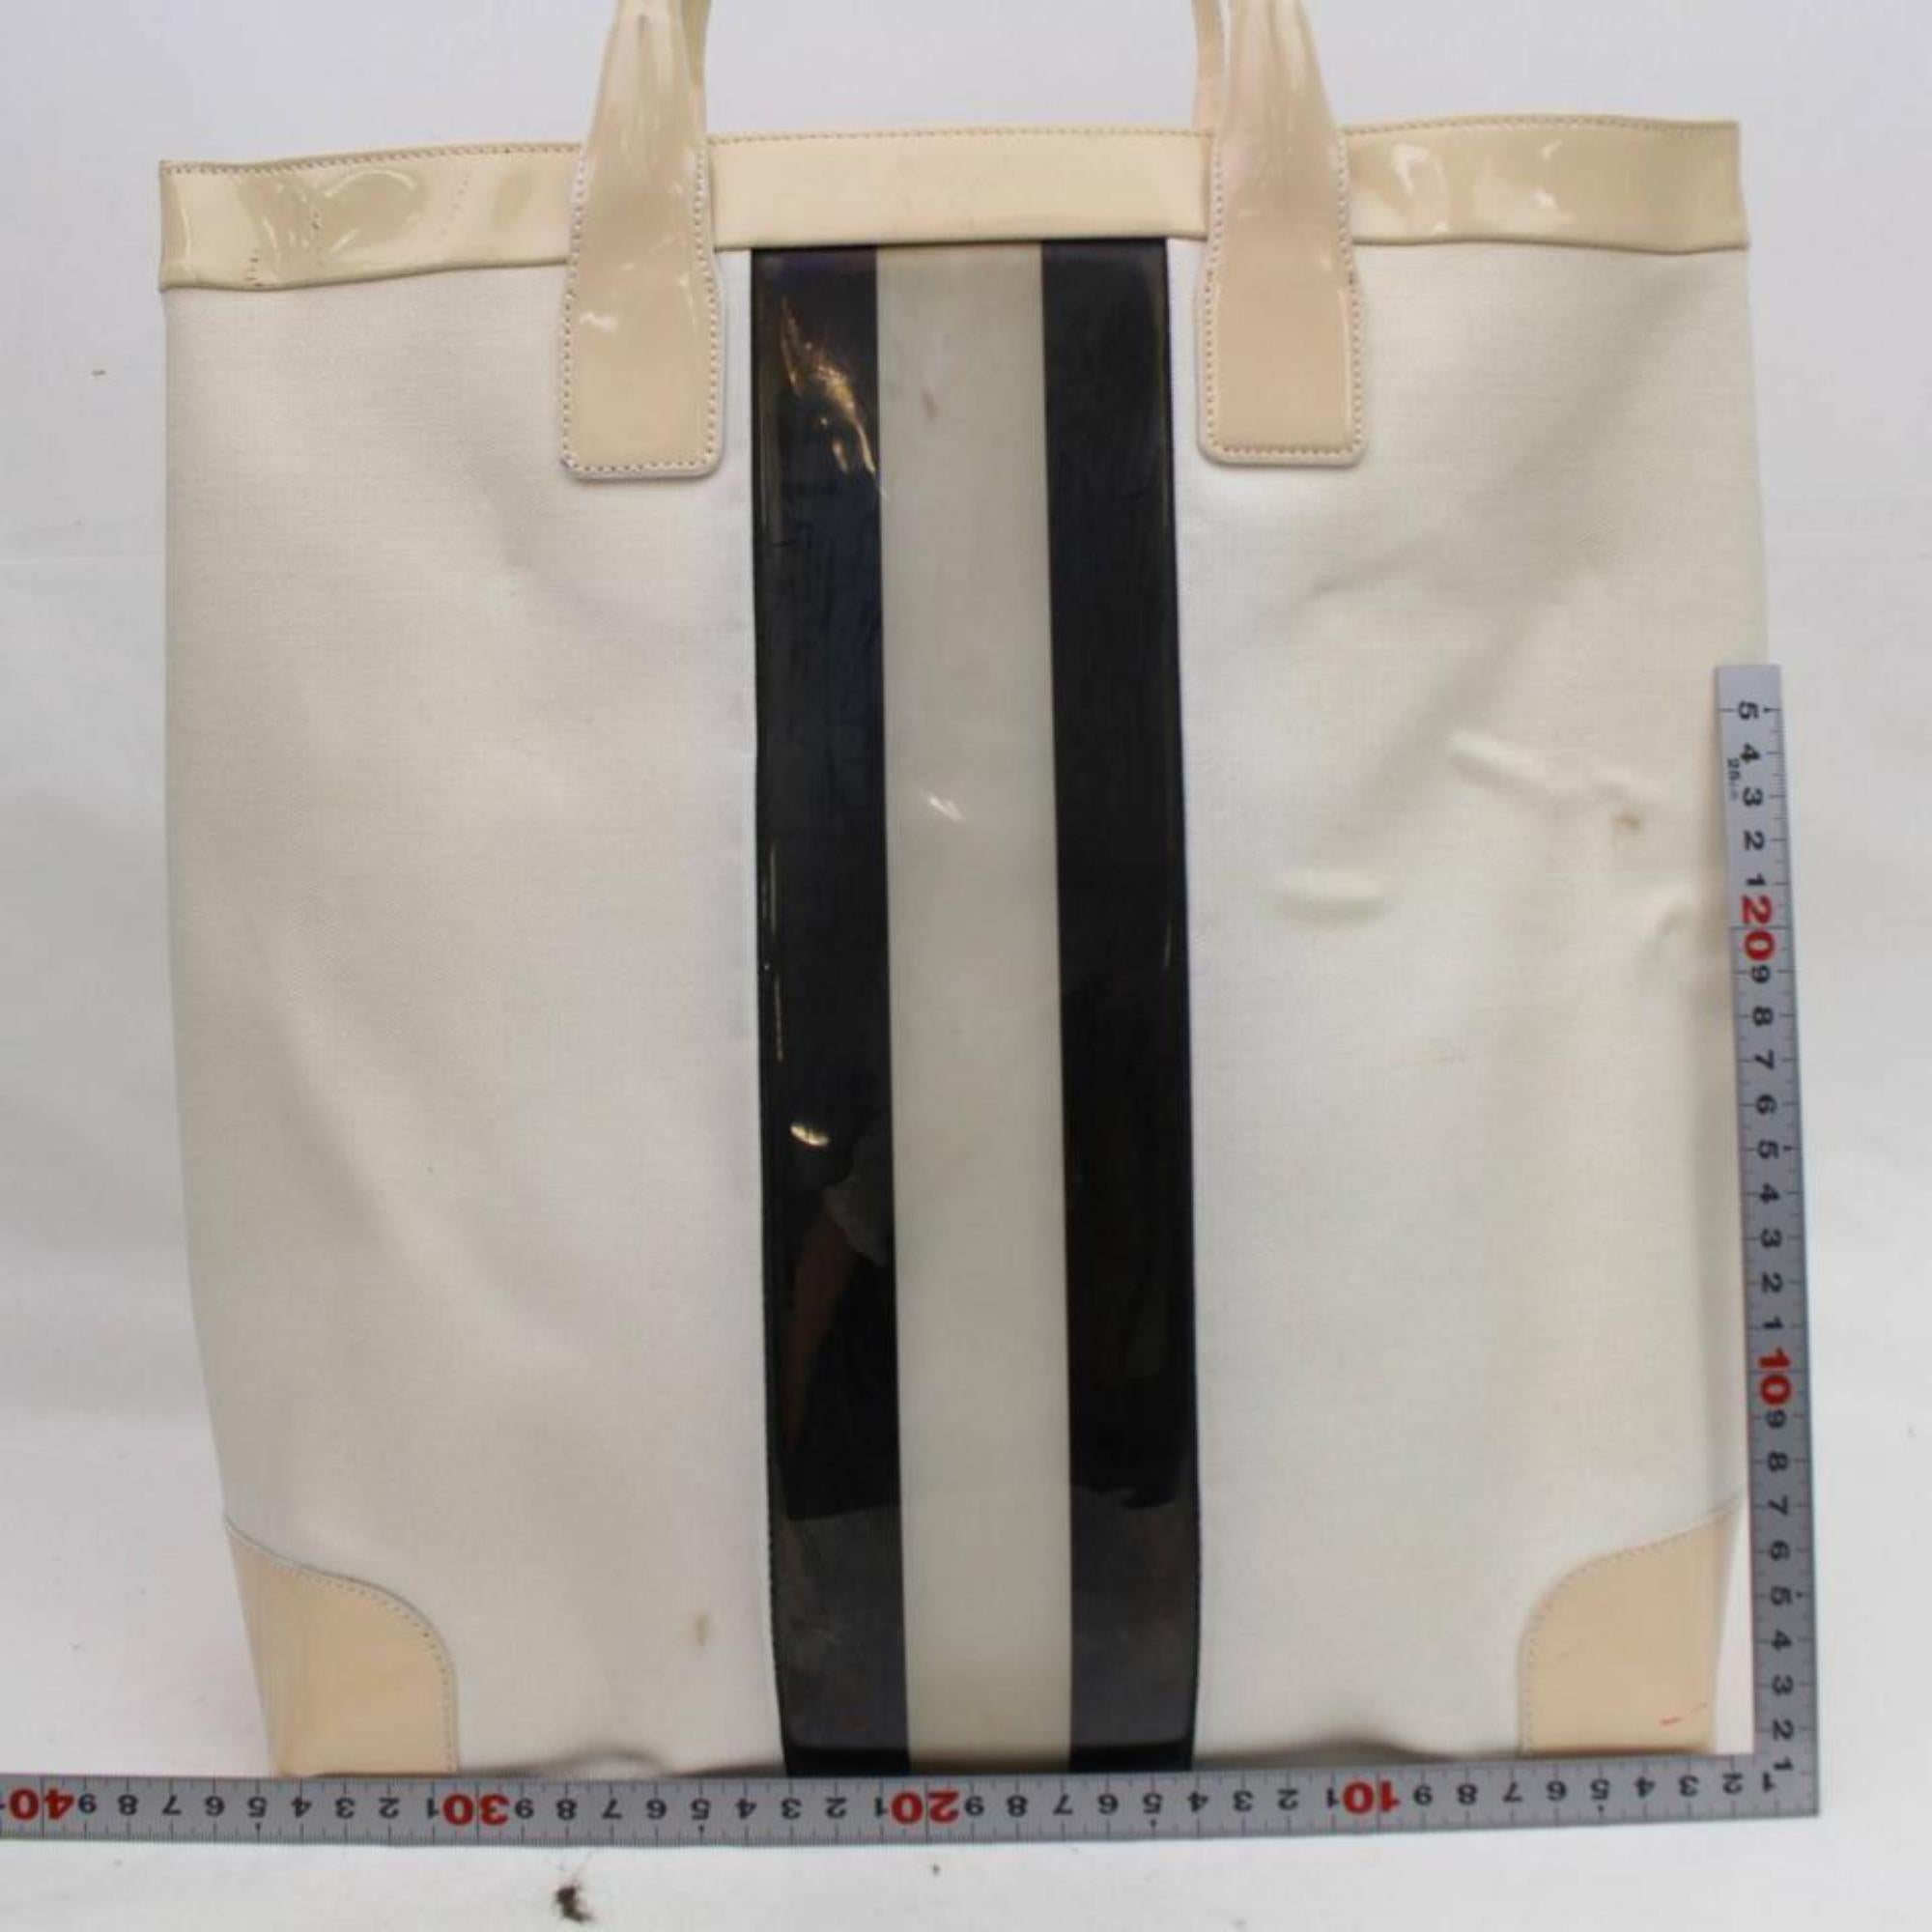 Gucci Sherry Ivory Web Shopper 868130 White Patent Leather Tote For Sale 1